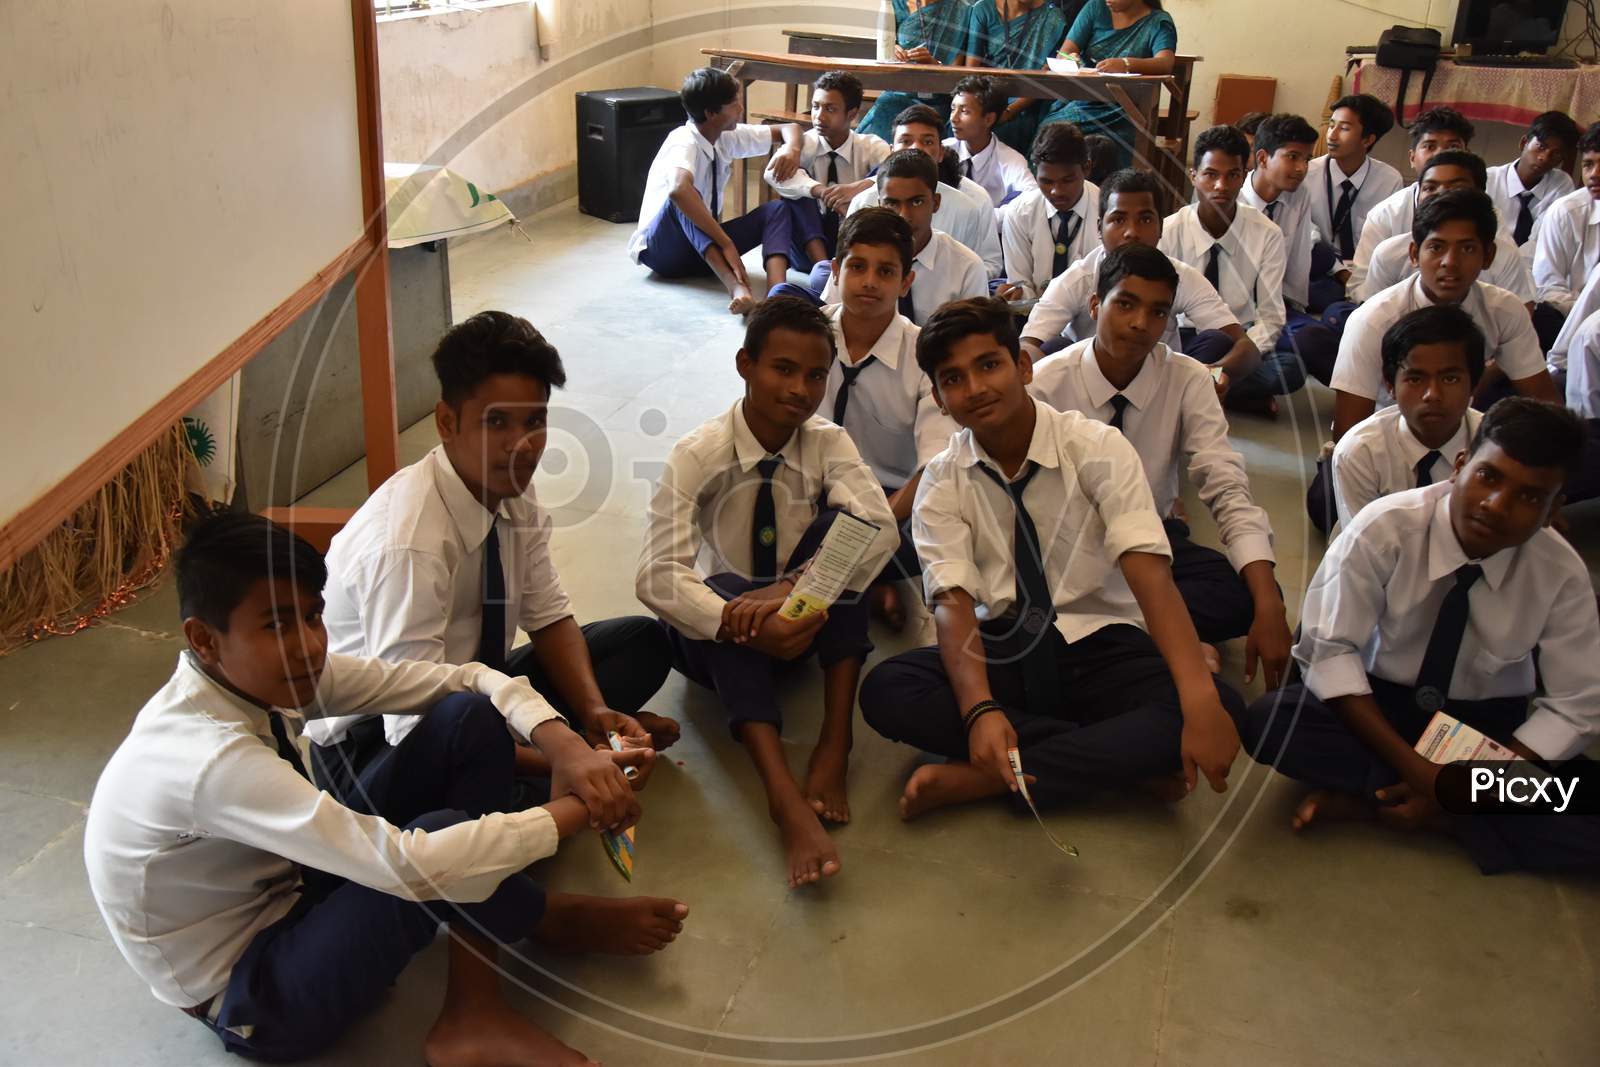 Group of unidentified Indian  students of government school inside the class  and enjoying class activity